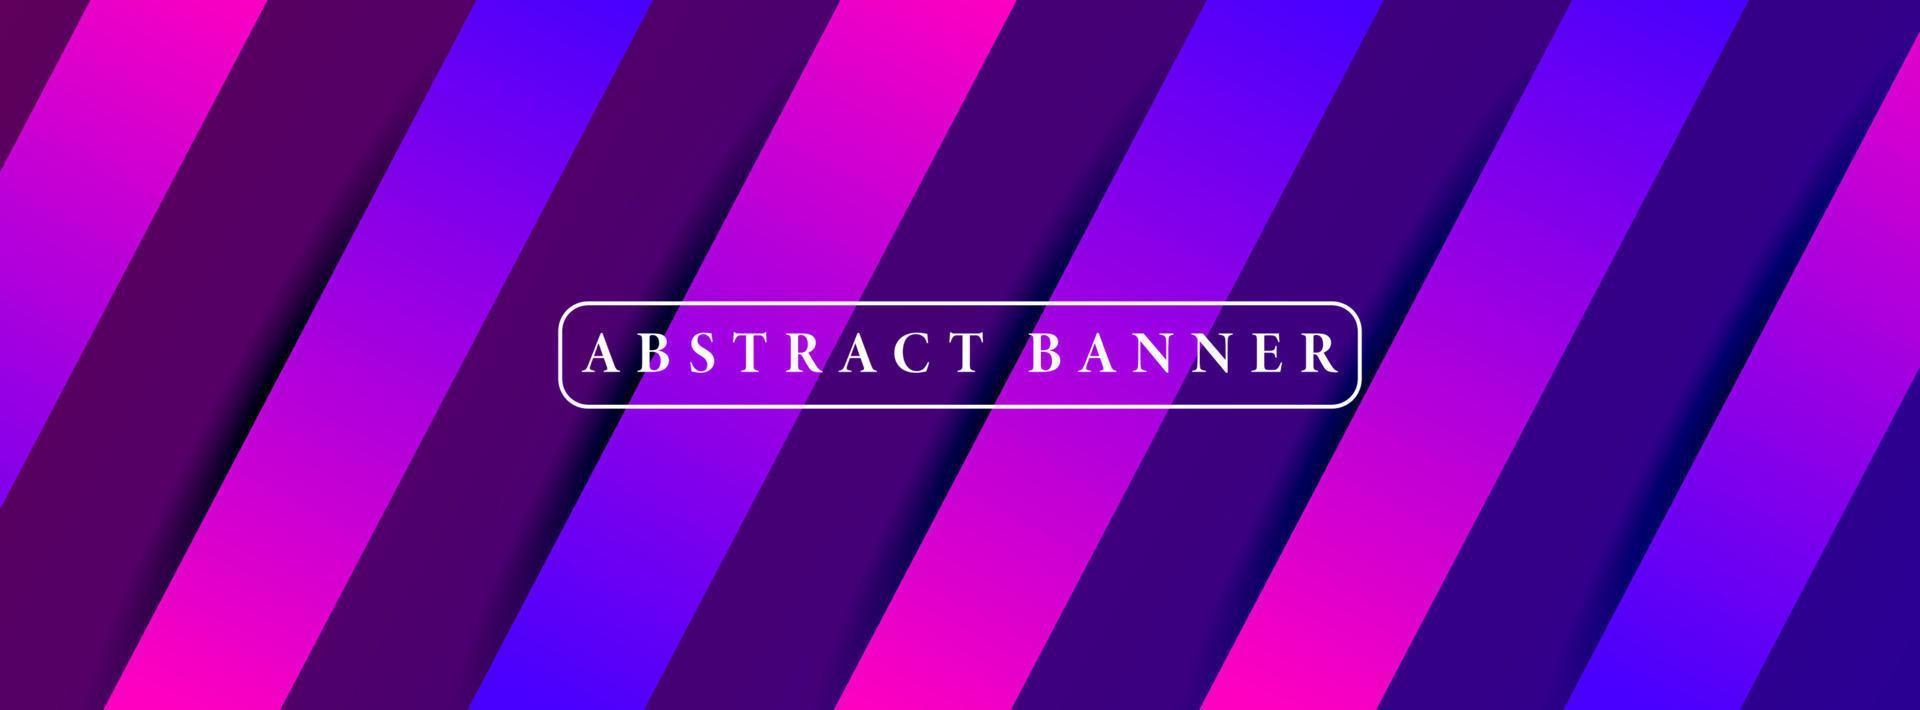 wide abstract banner created with gradient stripes vector